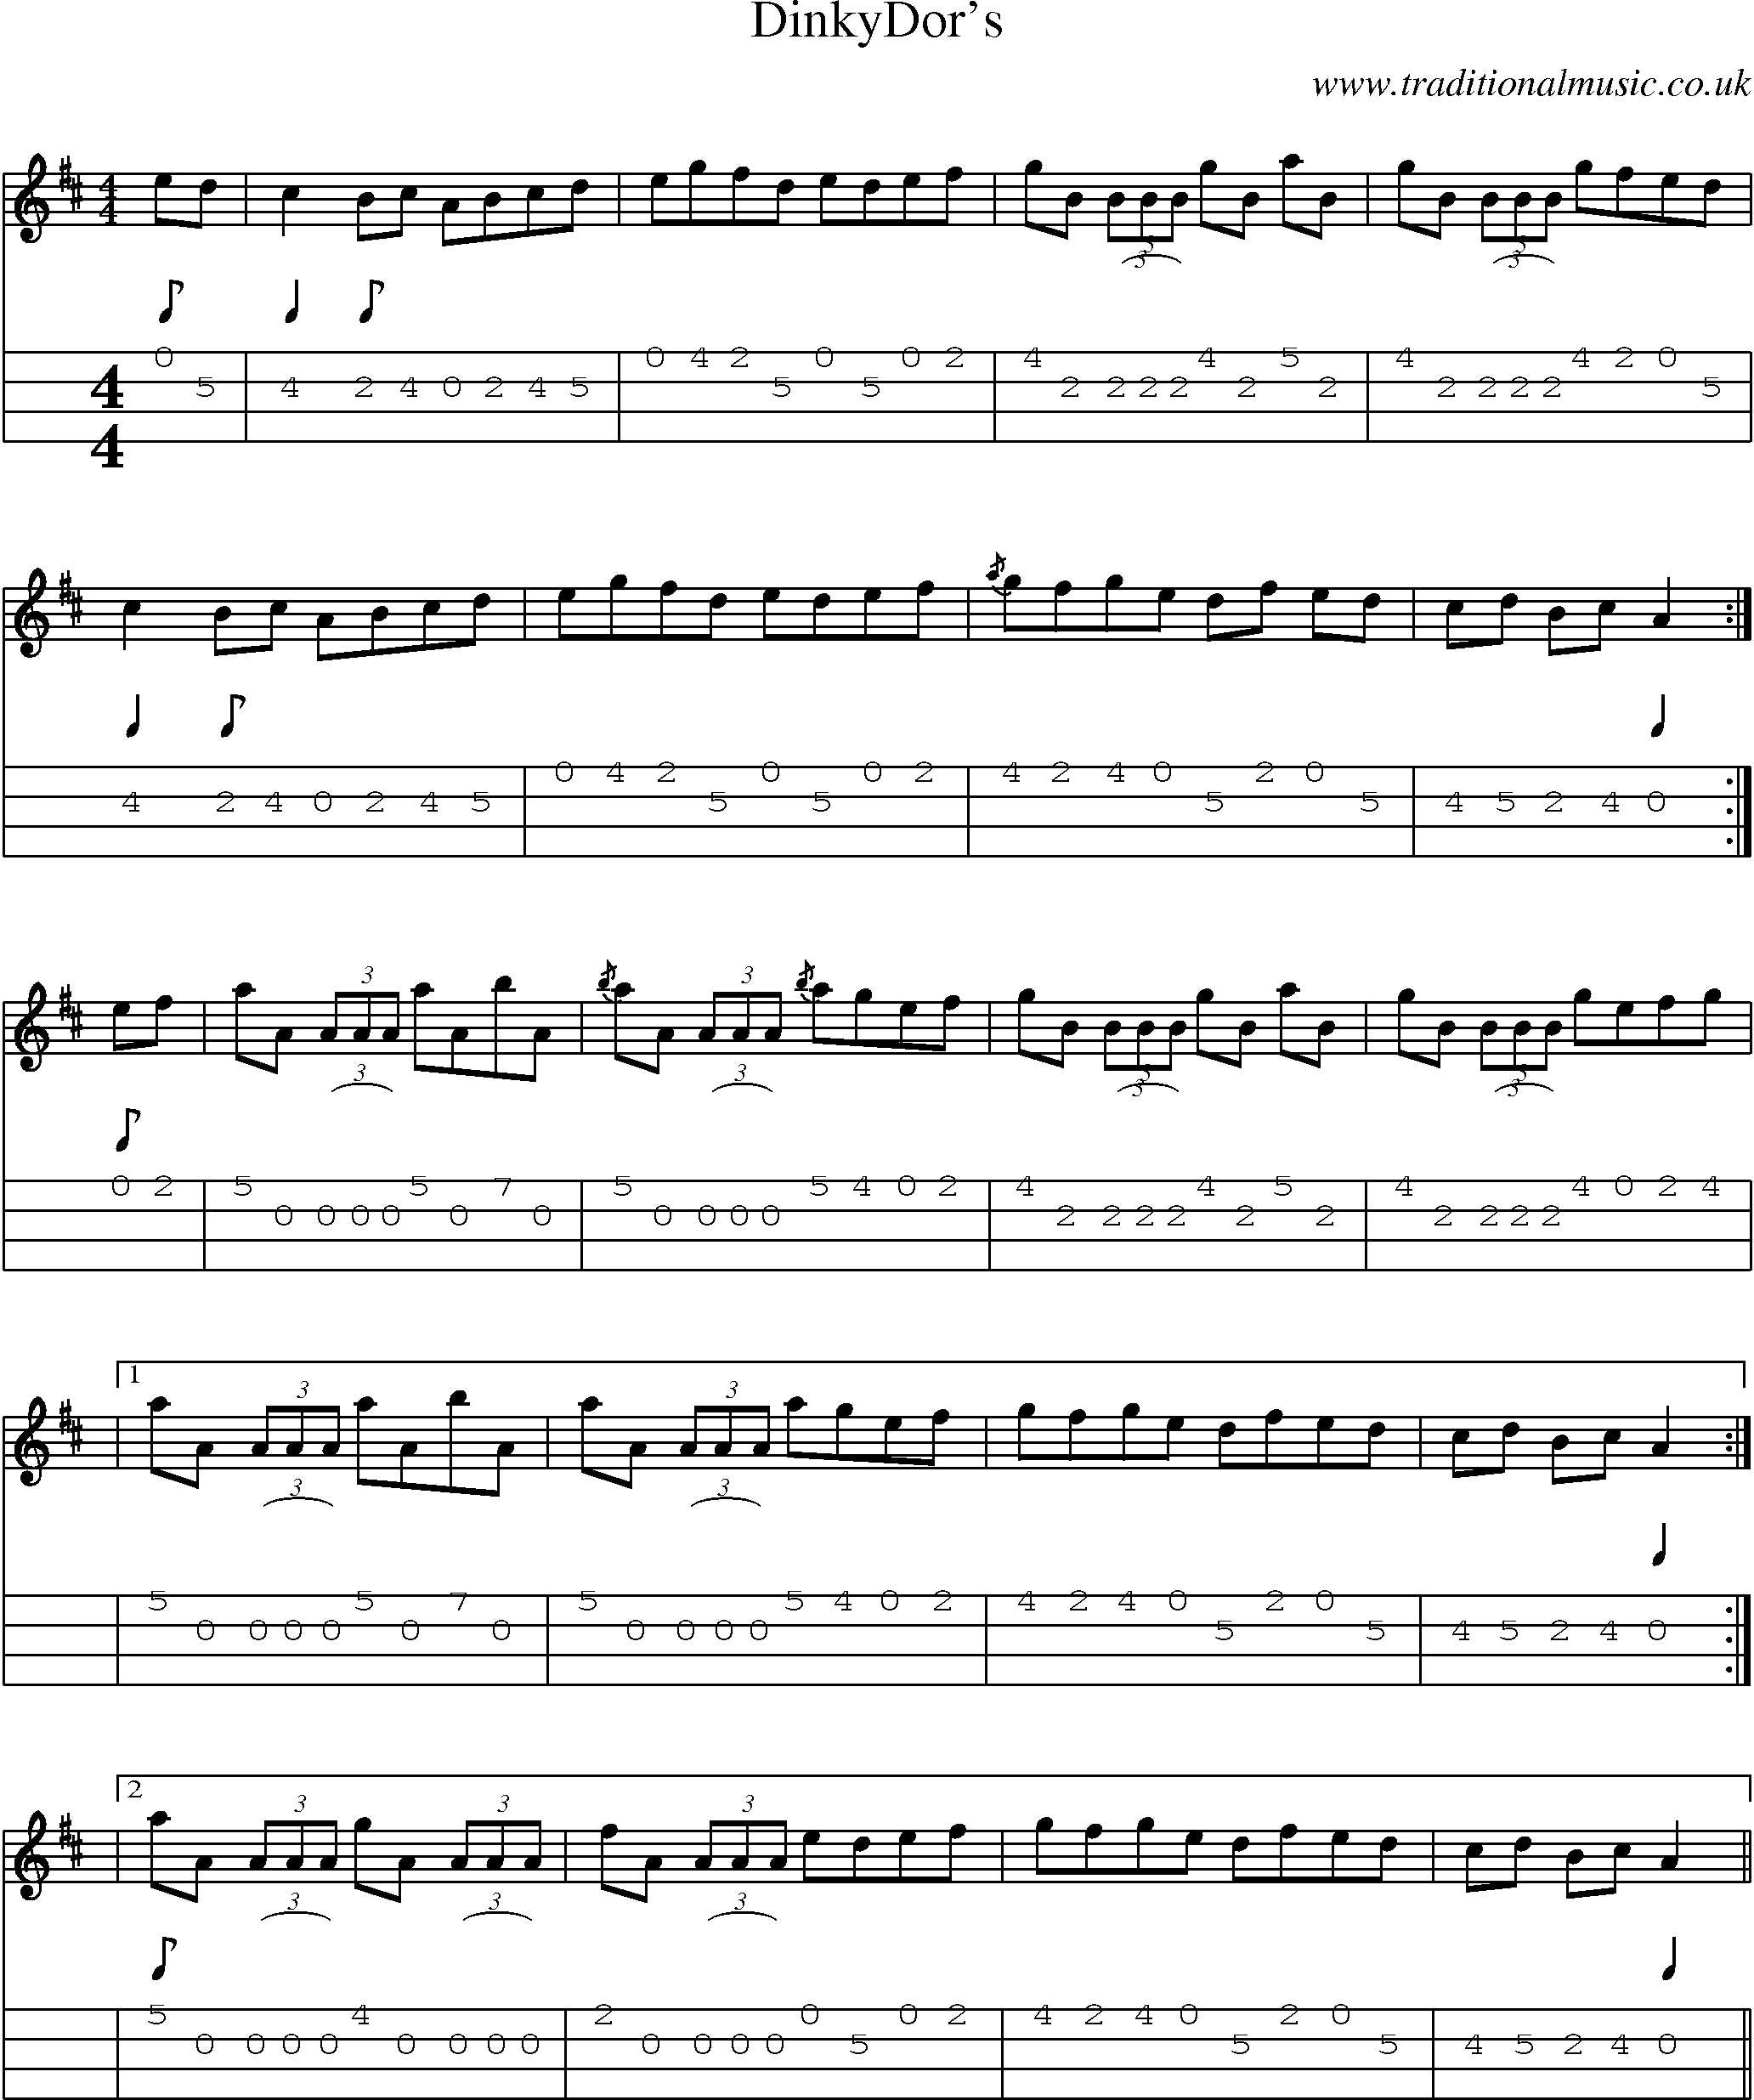 Music Score and Mandolin Tabs for Dinkydors